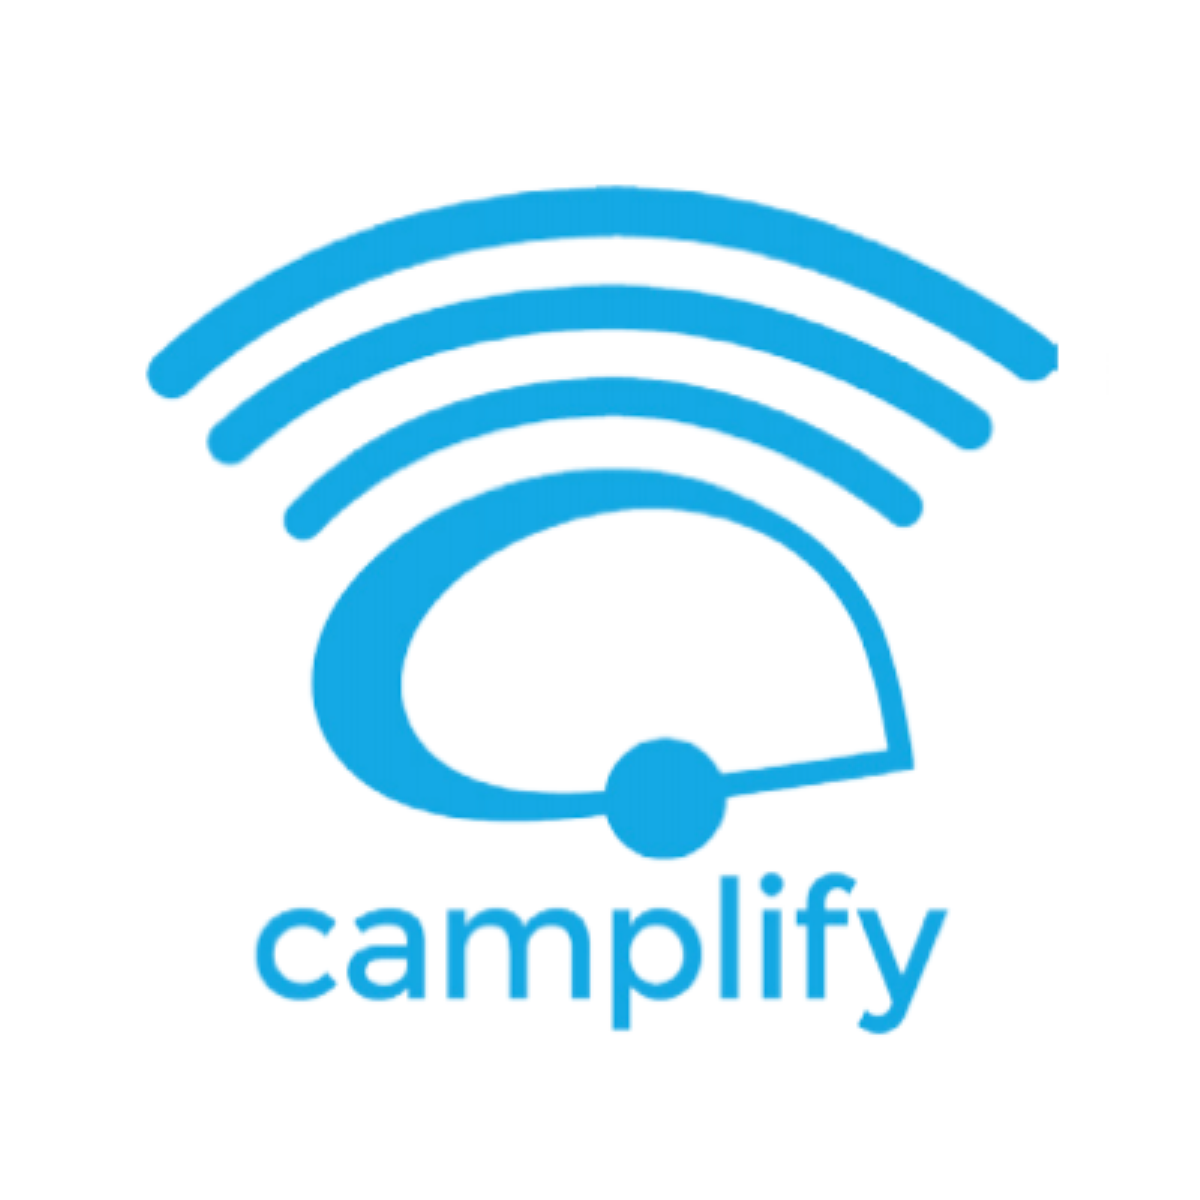 Camplify UK's momentum builds with the addition of 2 new team members